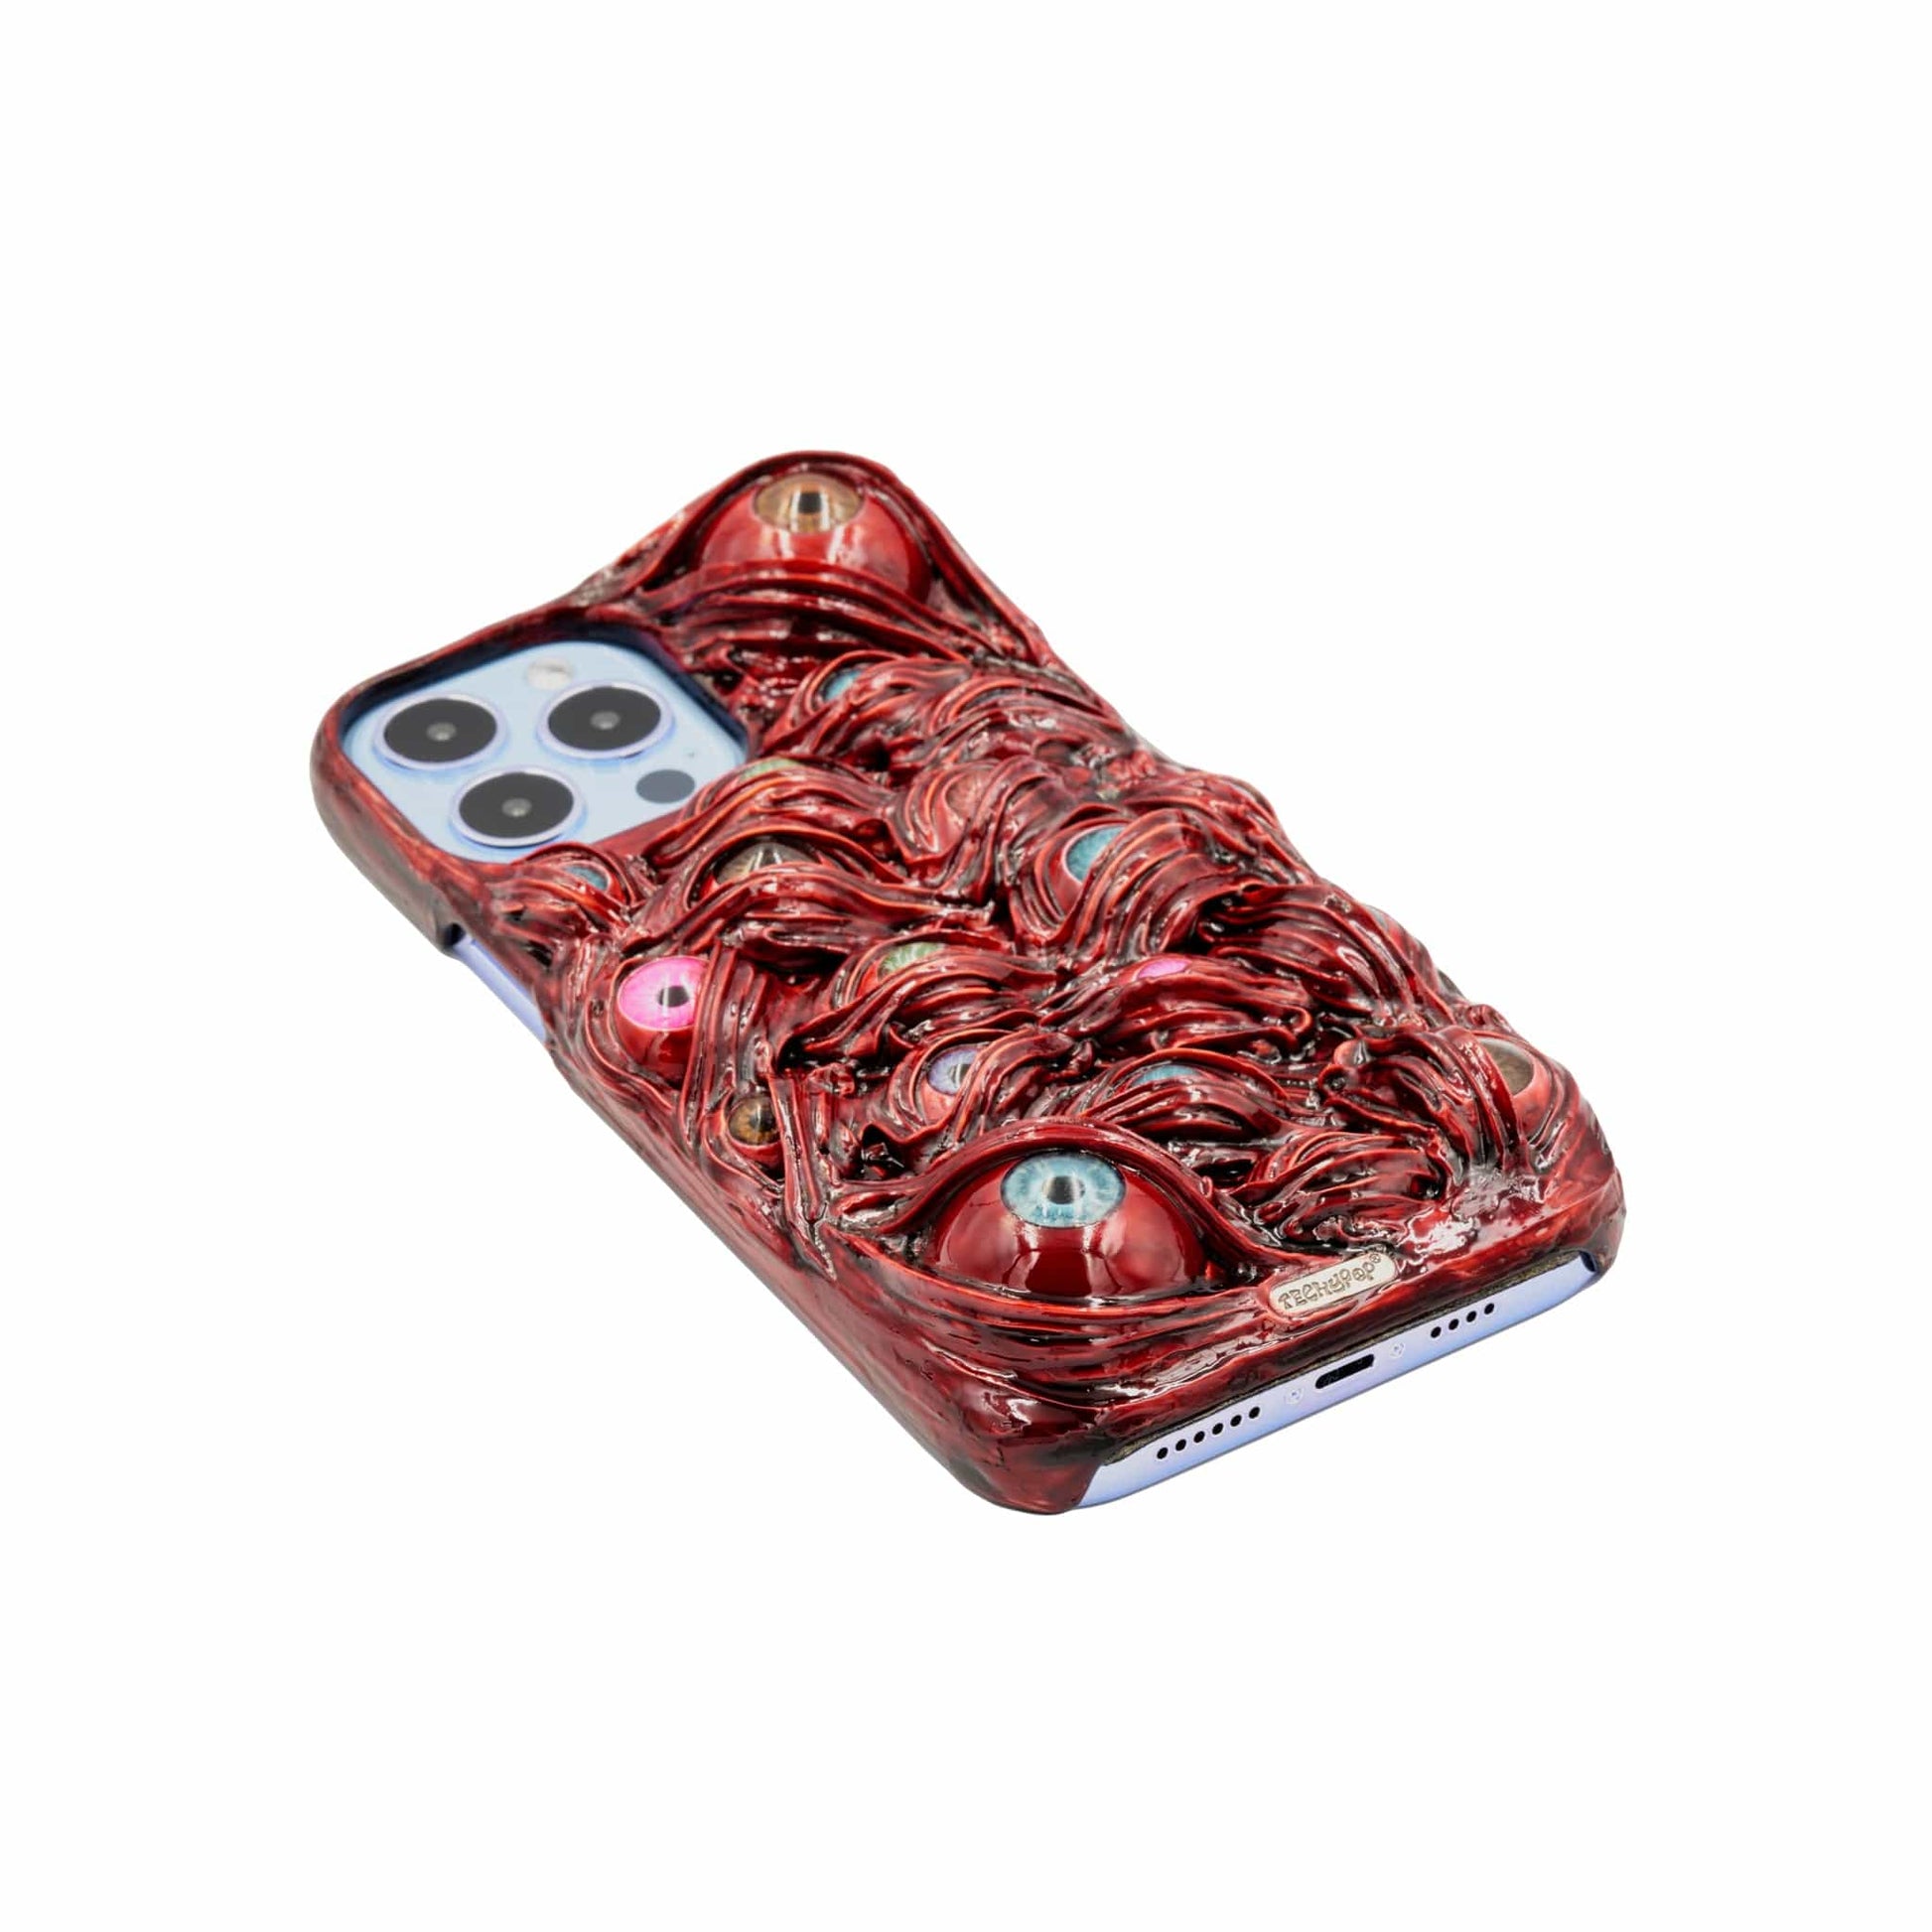 Techypop.com Please leave your iPhone & AirPods model in the note section Bloody Eyeball iPhone Case + AirPods Case + AirTag Case Set